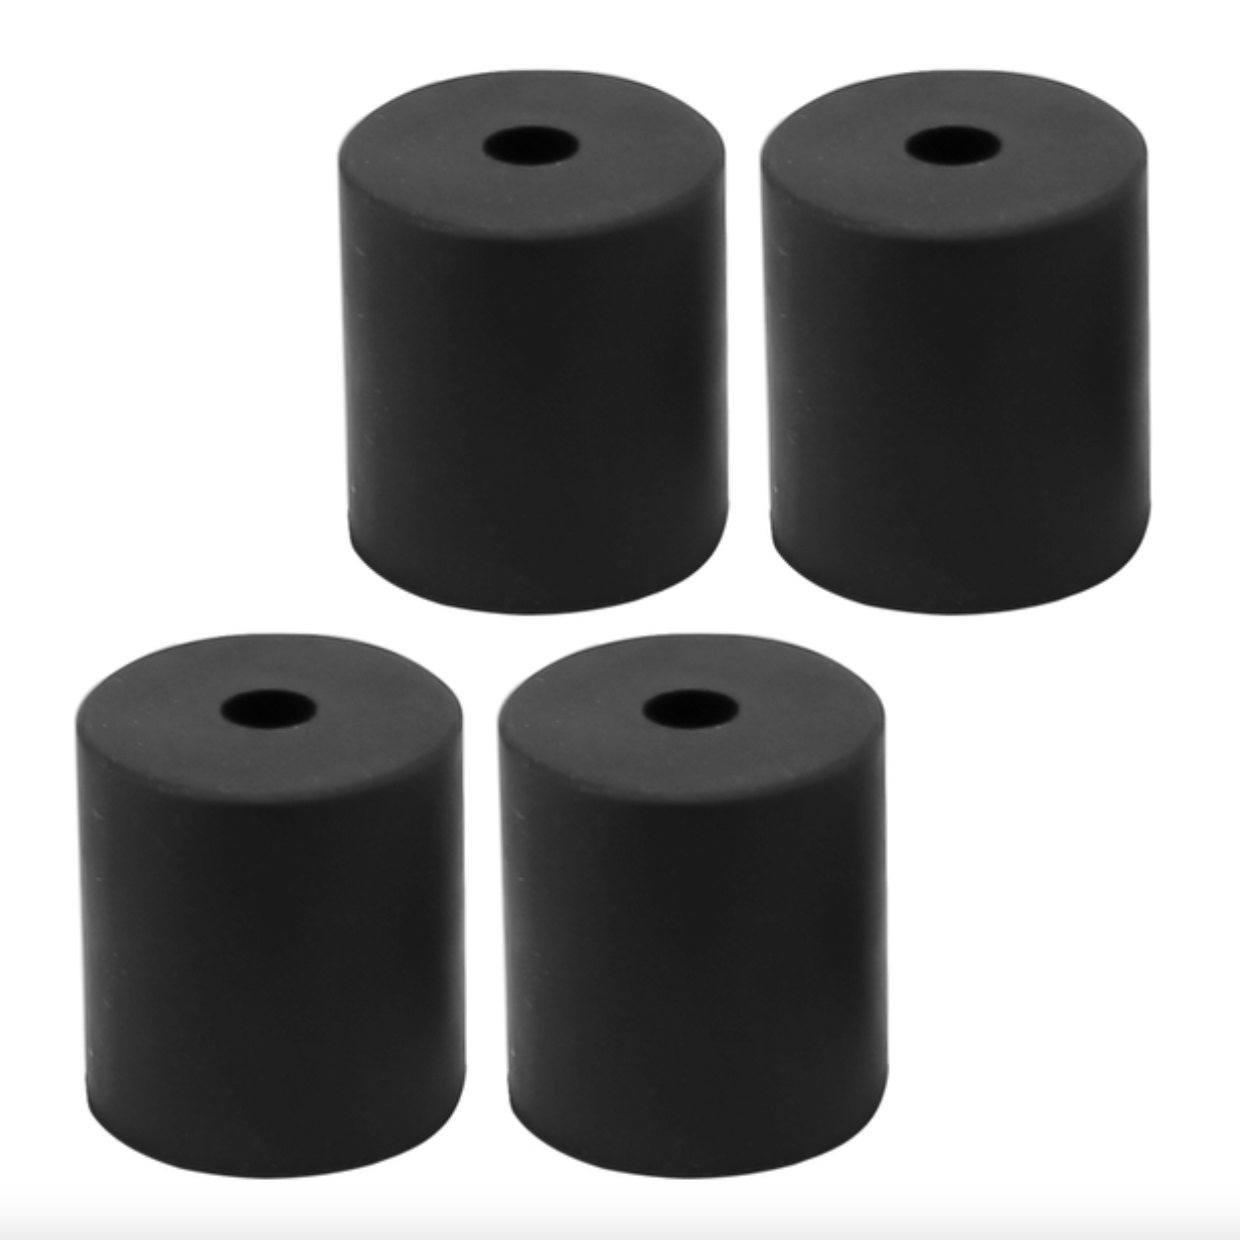  HPI Technology Silicone Bed Spacers (Mounts) for Creality, GeeTech, Anet & Evo Printers